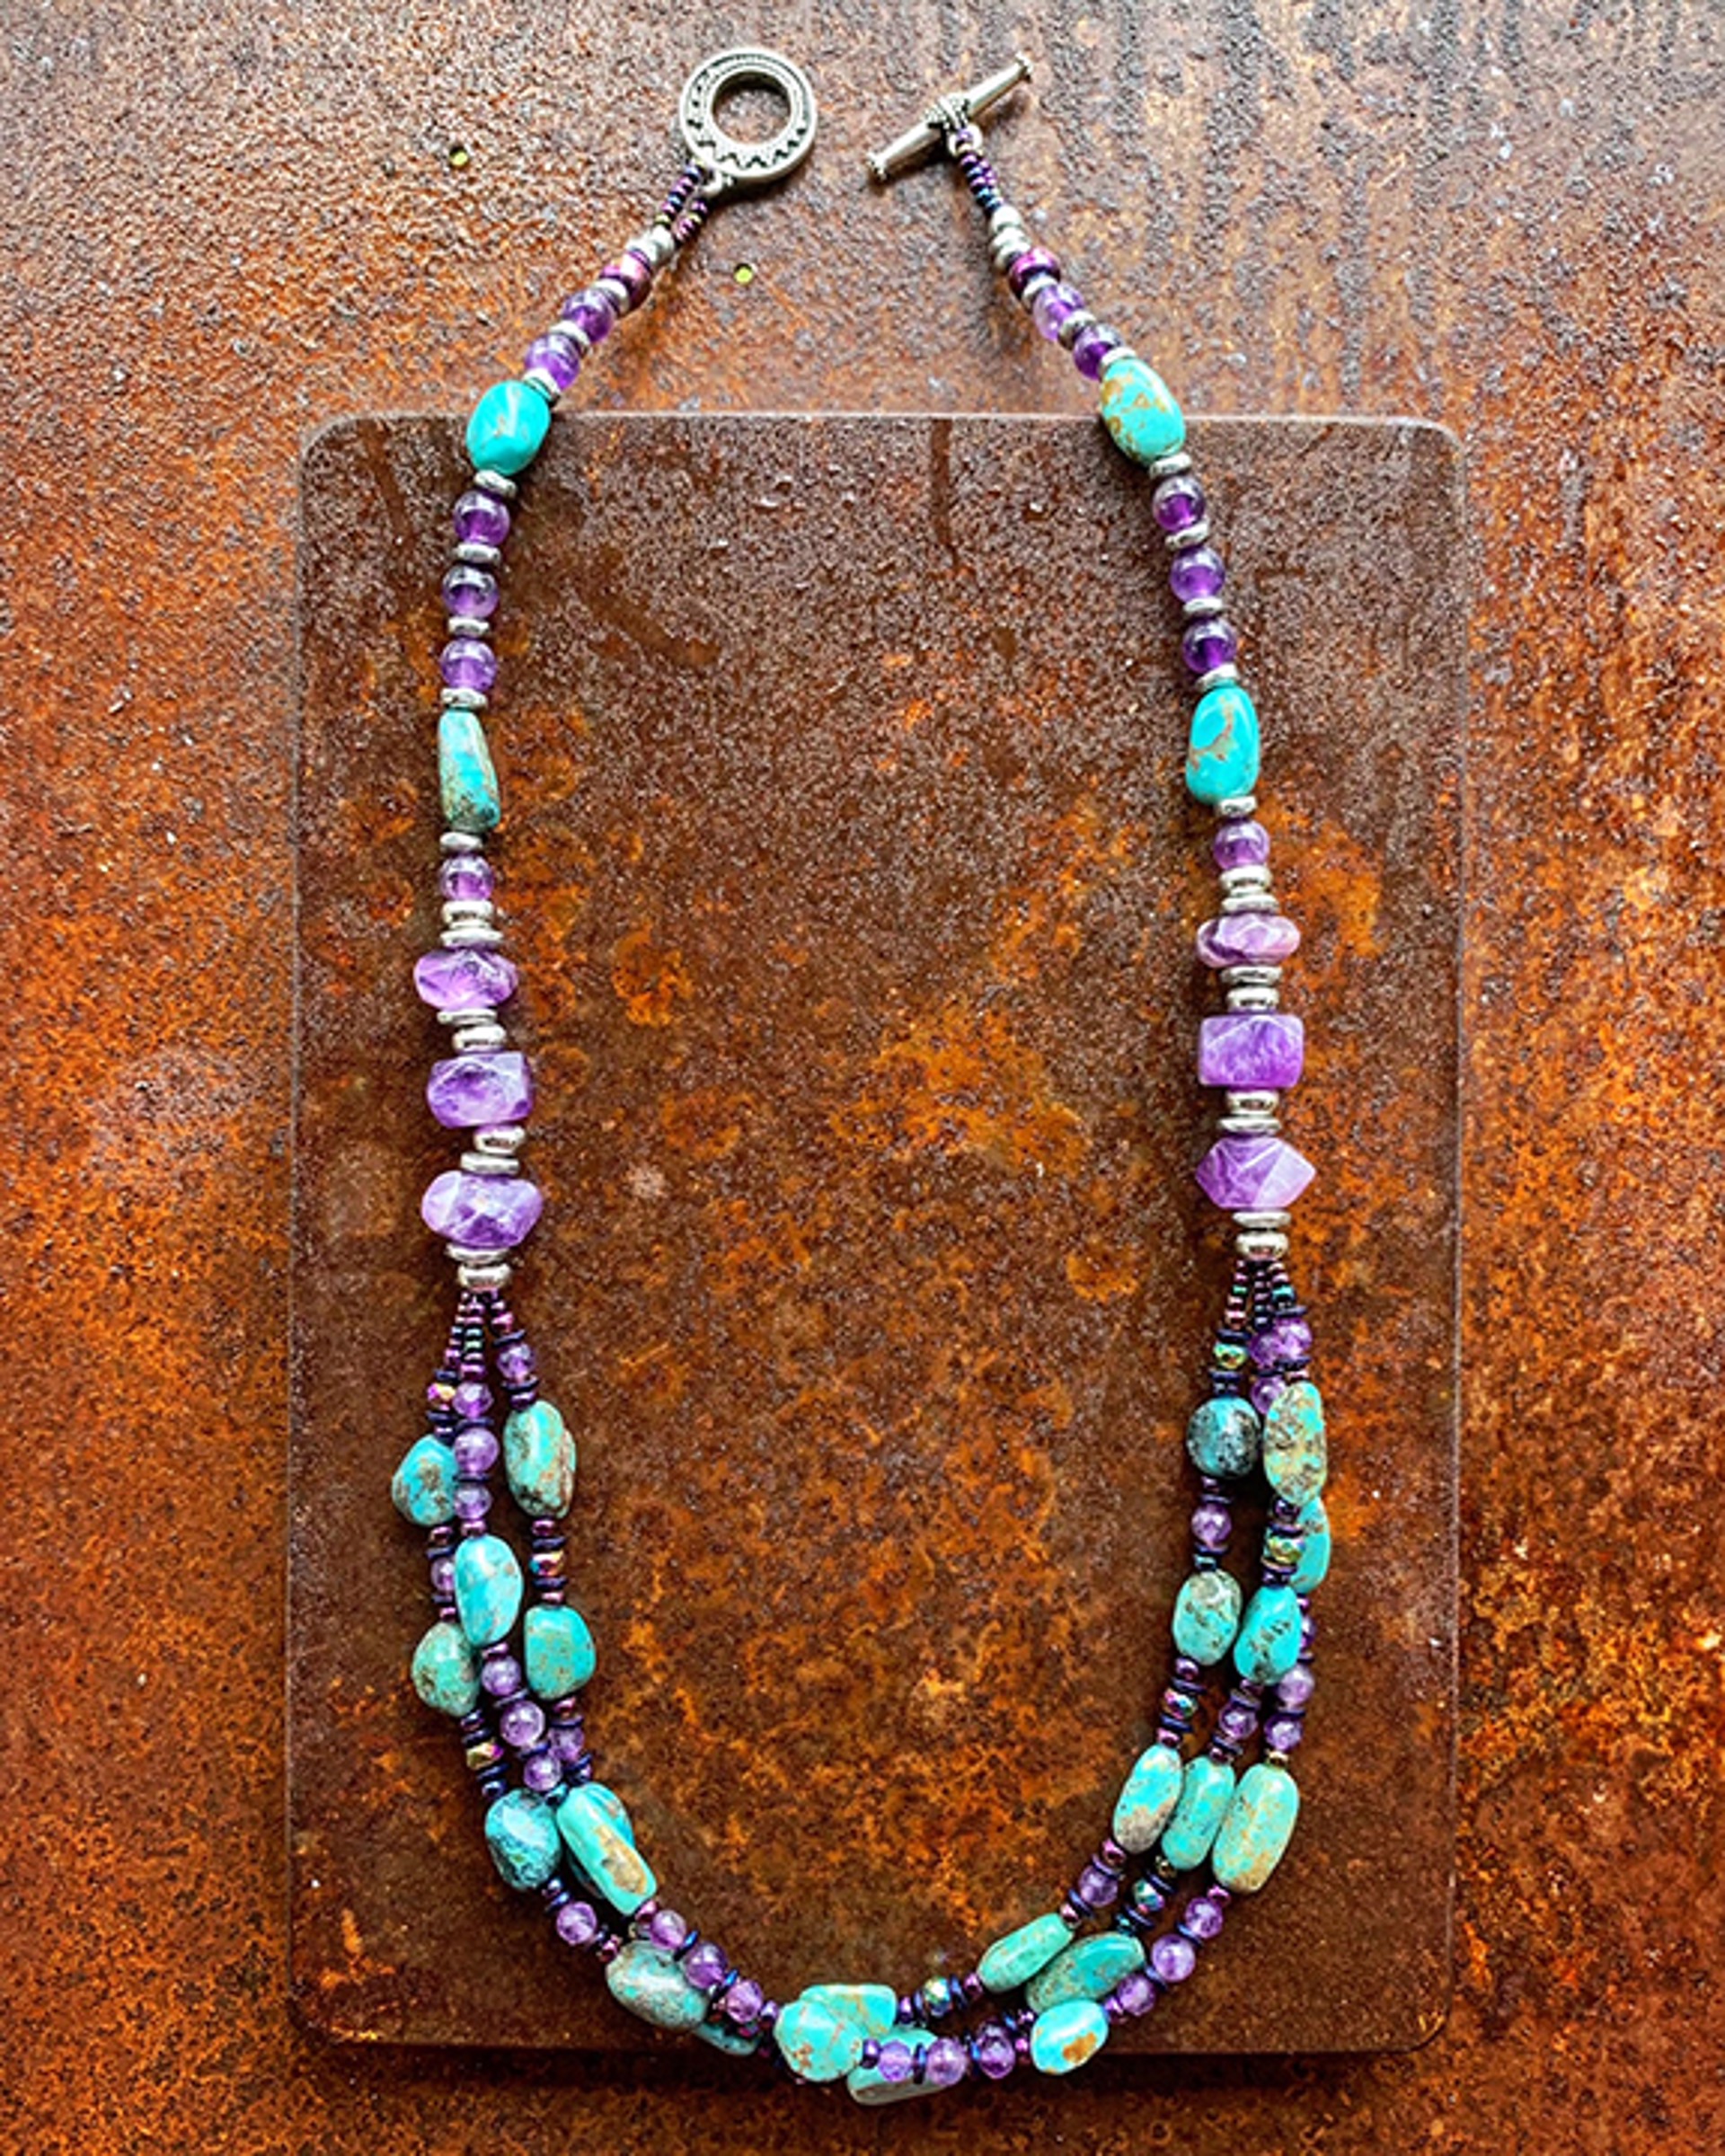 K738 Triple Strand Amethyst and Turquoise Necklace by Kelly Ormsby